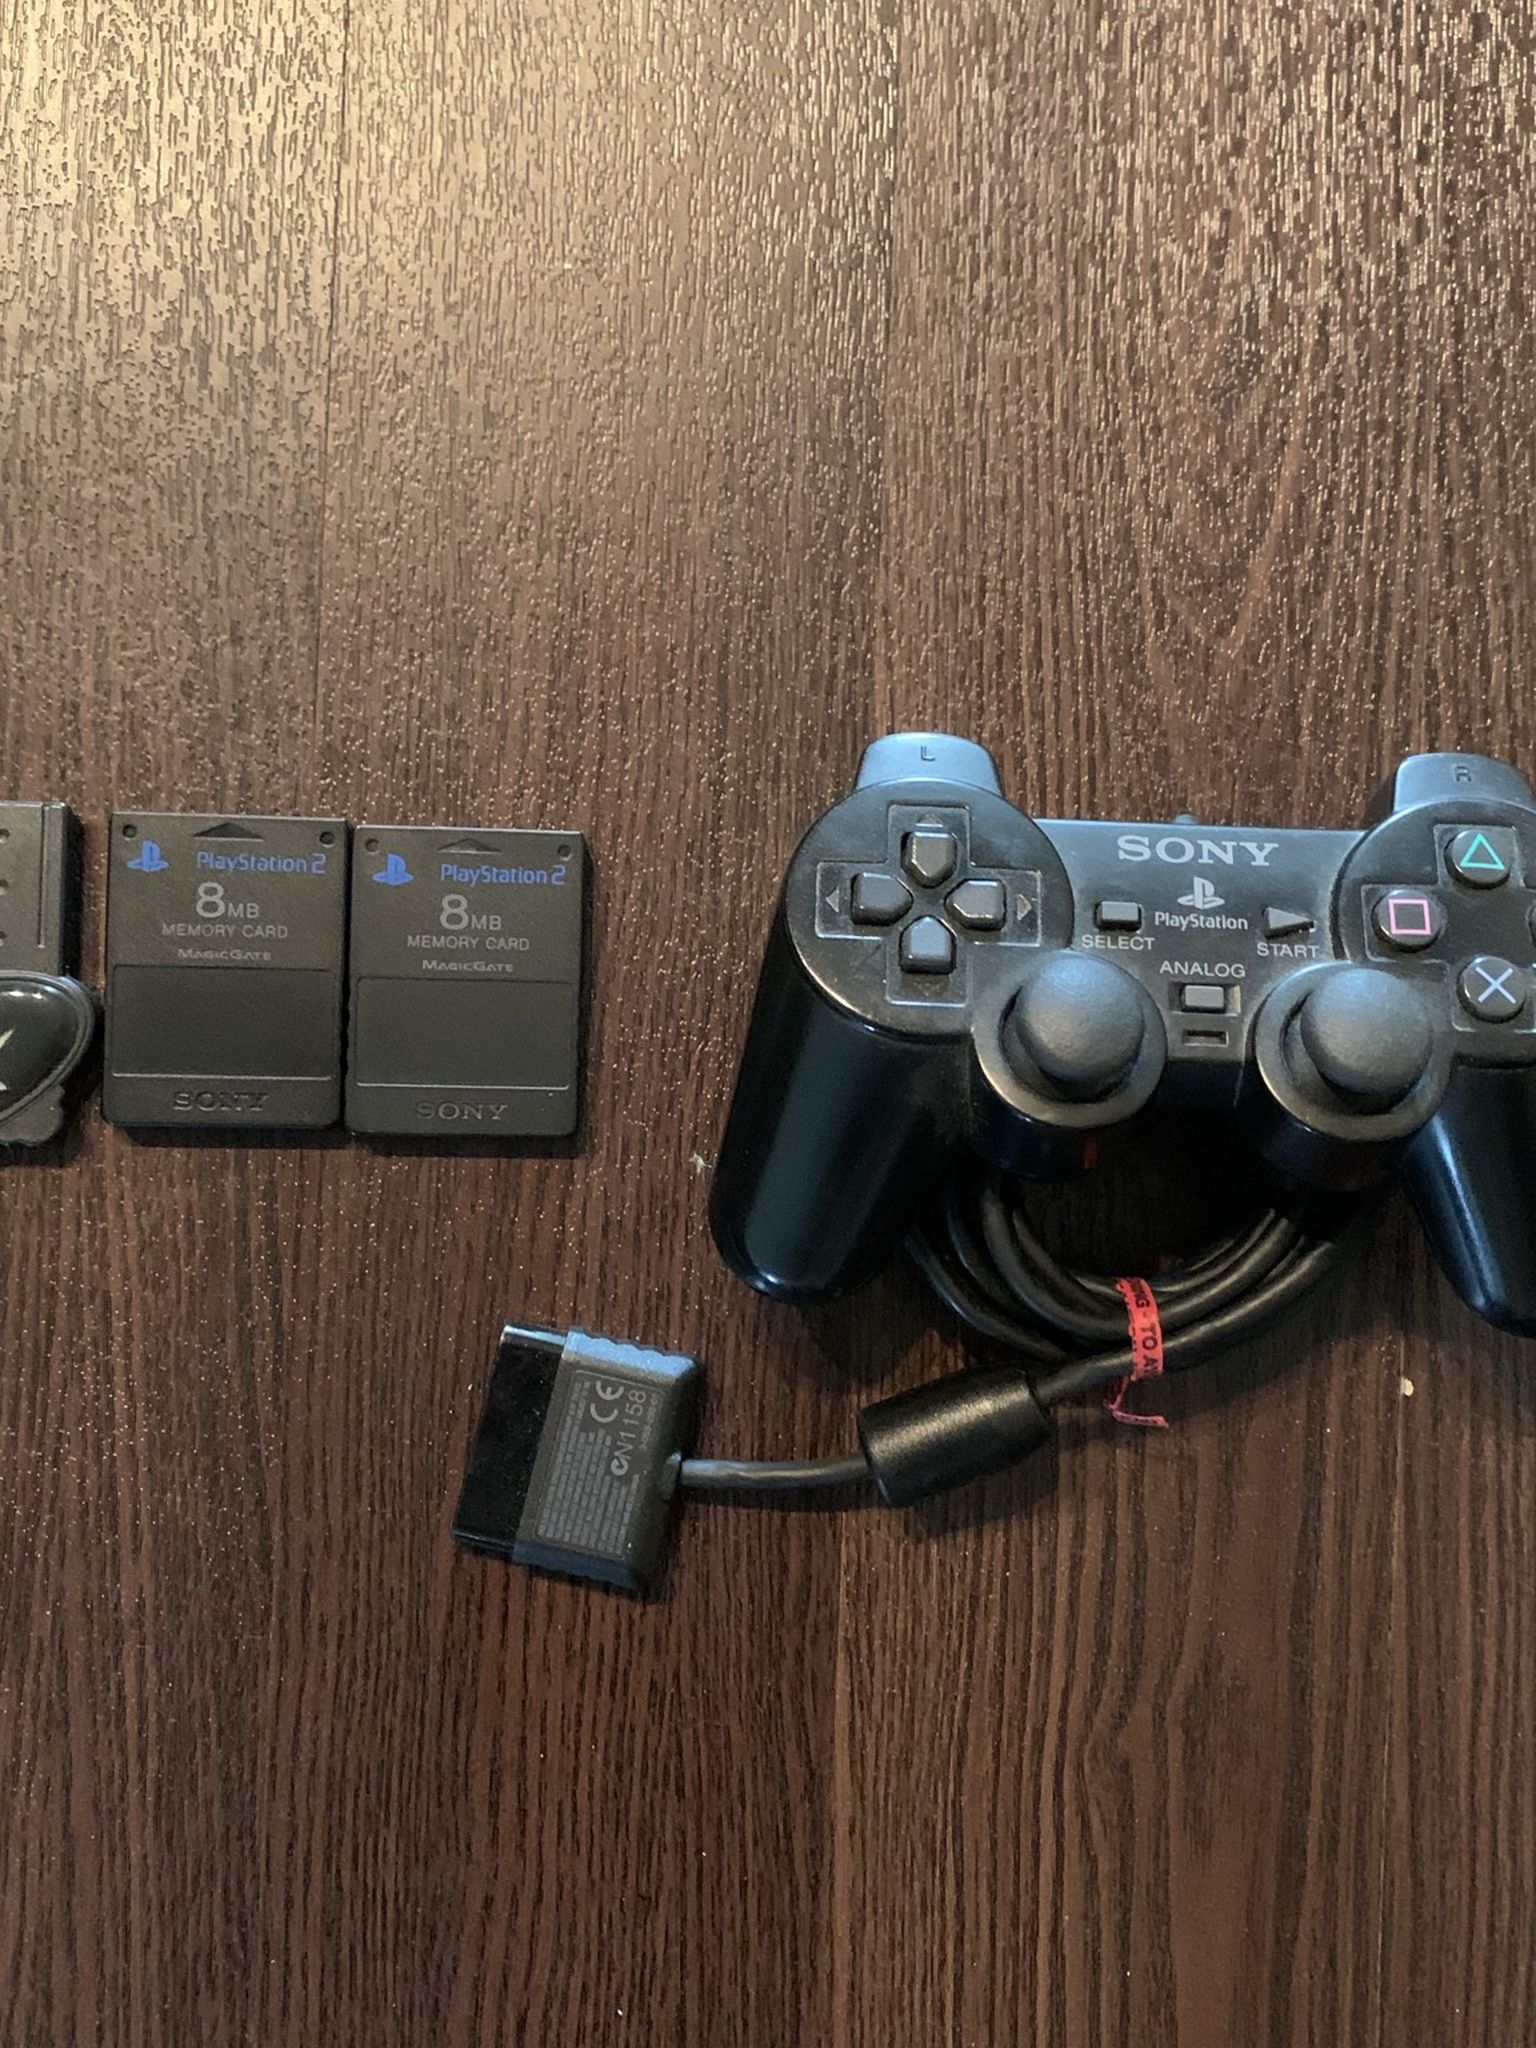 Ps2 Controller, Memory Cards, And Game Shark